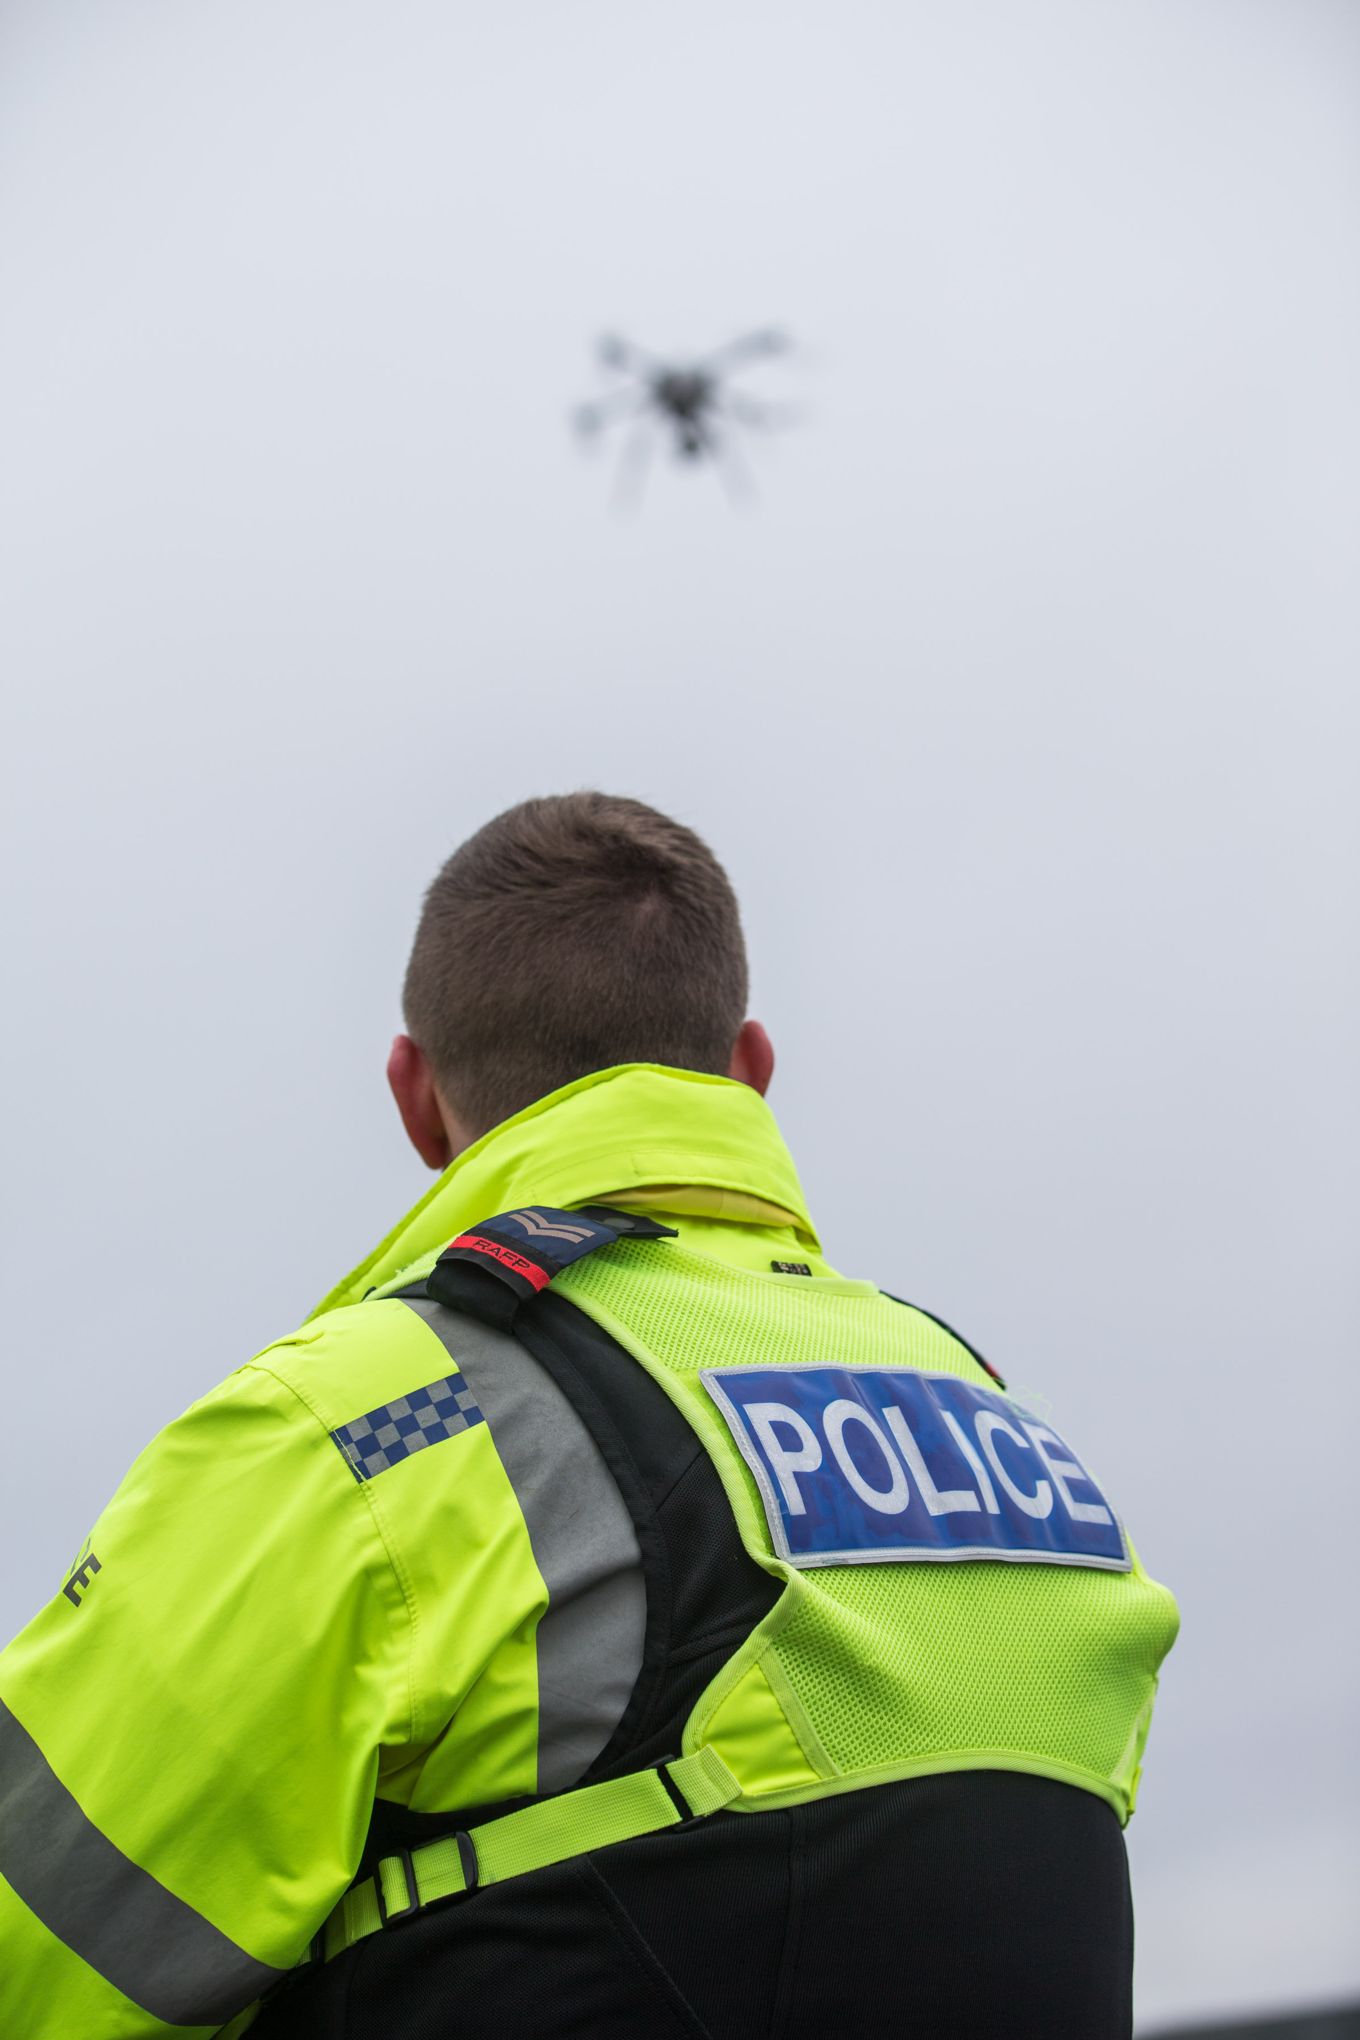  Drone trials have been carried out at RAF Waddington by the RAF Police Flight. Pictured is Cpl Ben Thatcher bringing the Drone in to land.